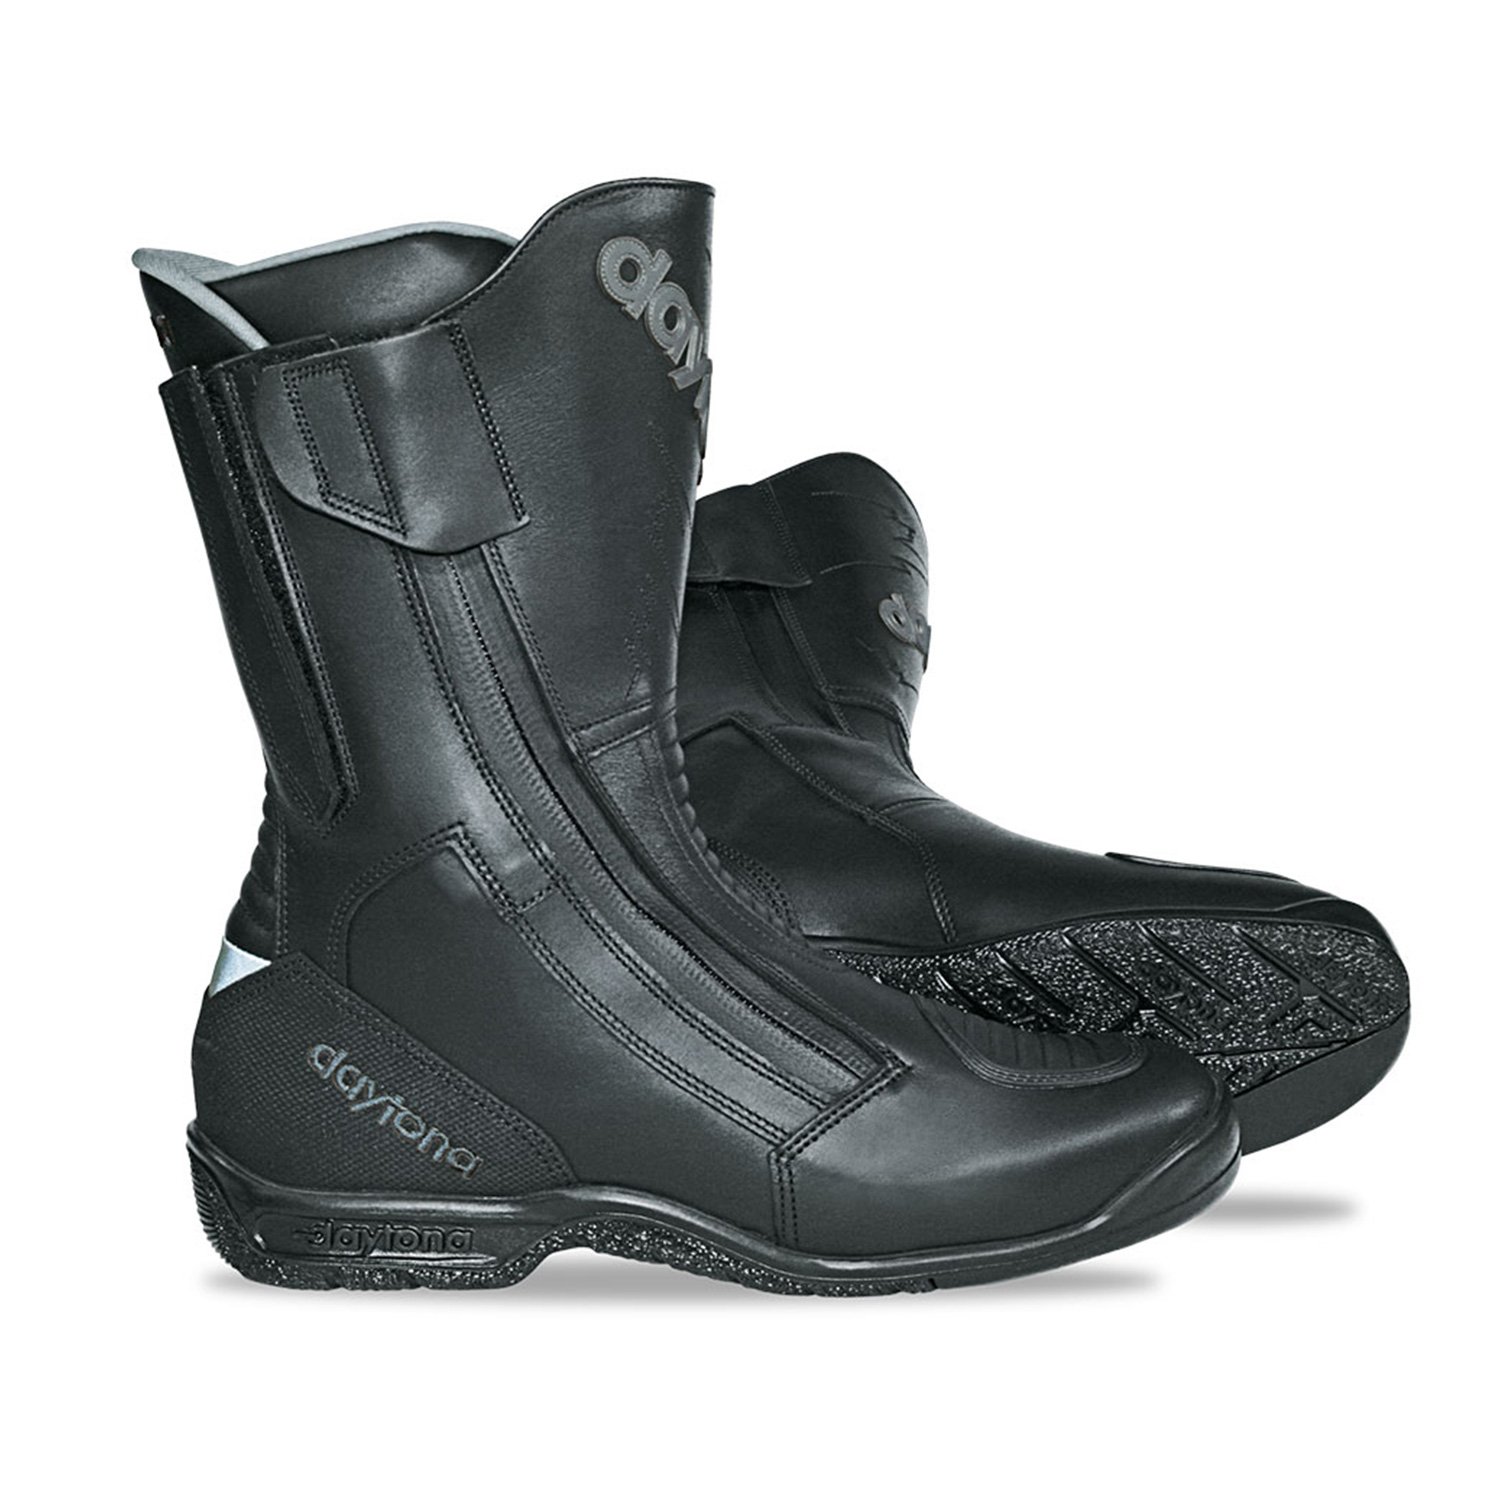 Image of Daytona Road Star X-Wide [XL] Noir Bottes Taille 48